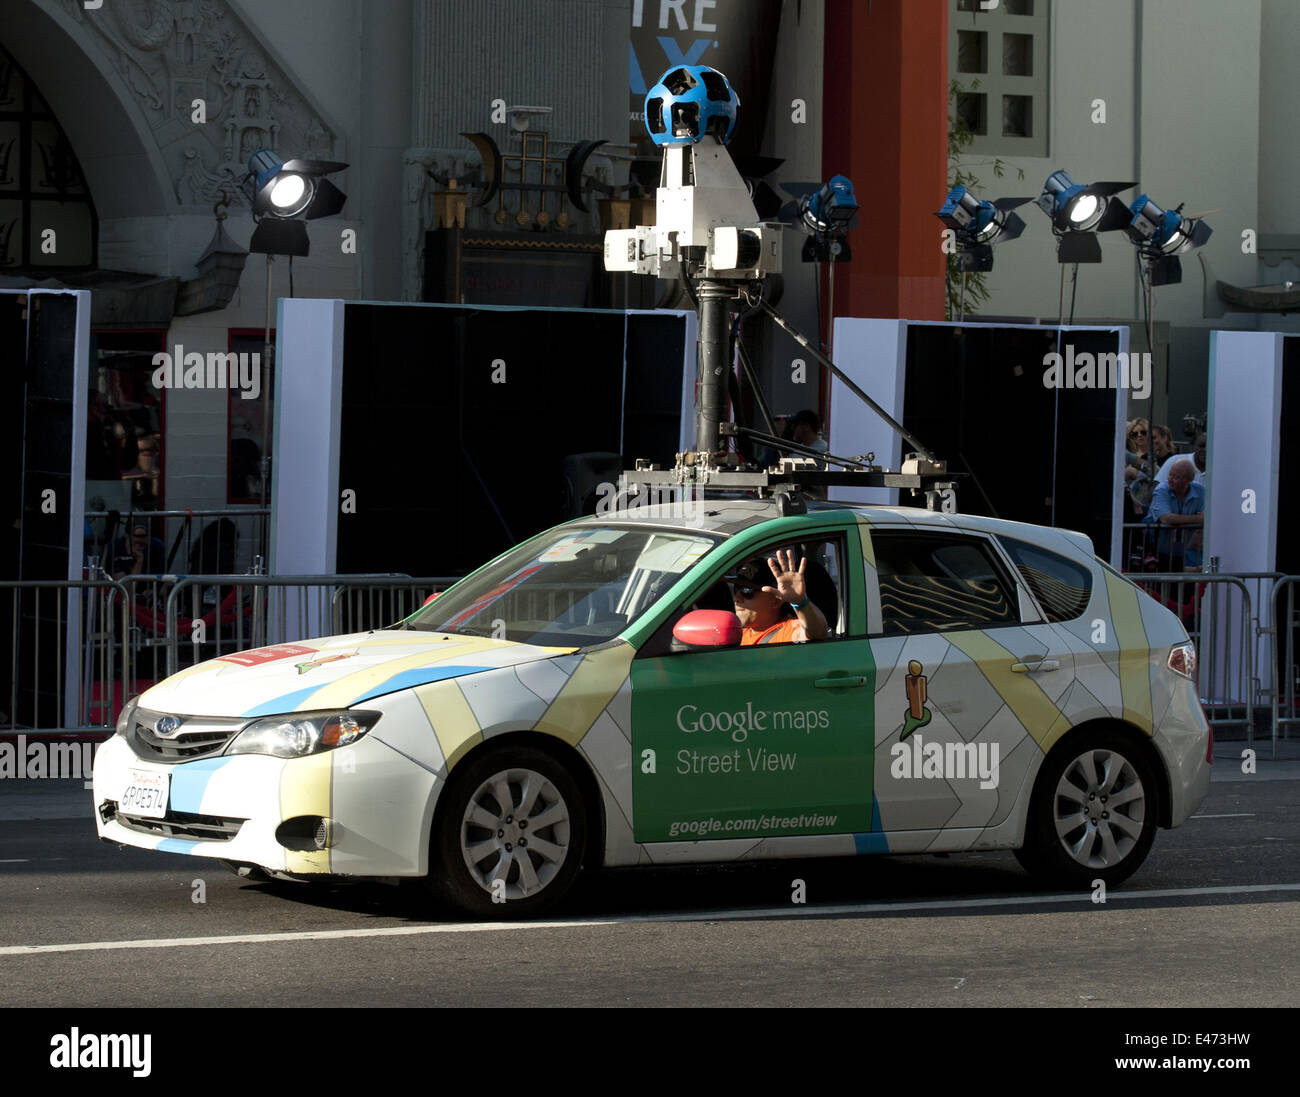 June 30, 2014 - Hollywood, California, U.S - A Google Street View Car makes its way west on Hollywood Blvd. in Hollywood during the Tammy Movie Premiere on Monday June 30, 2014. (Credit Image: © David Bro/ZUMA Wire) Stock Photo